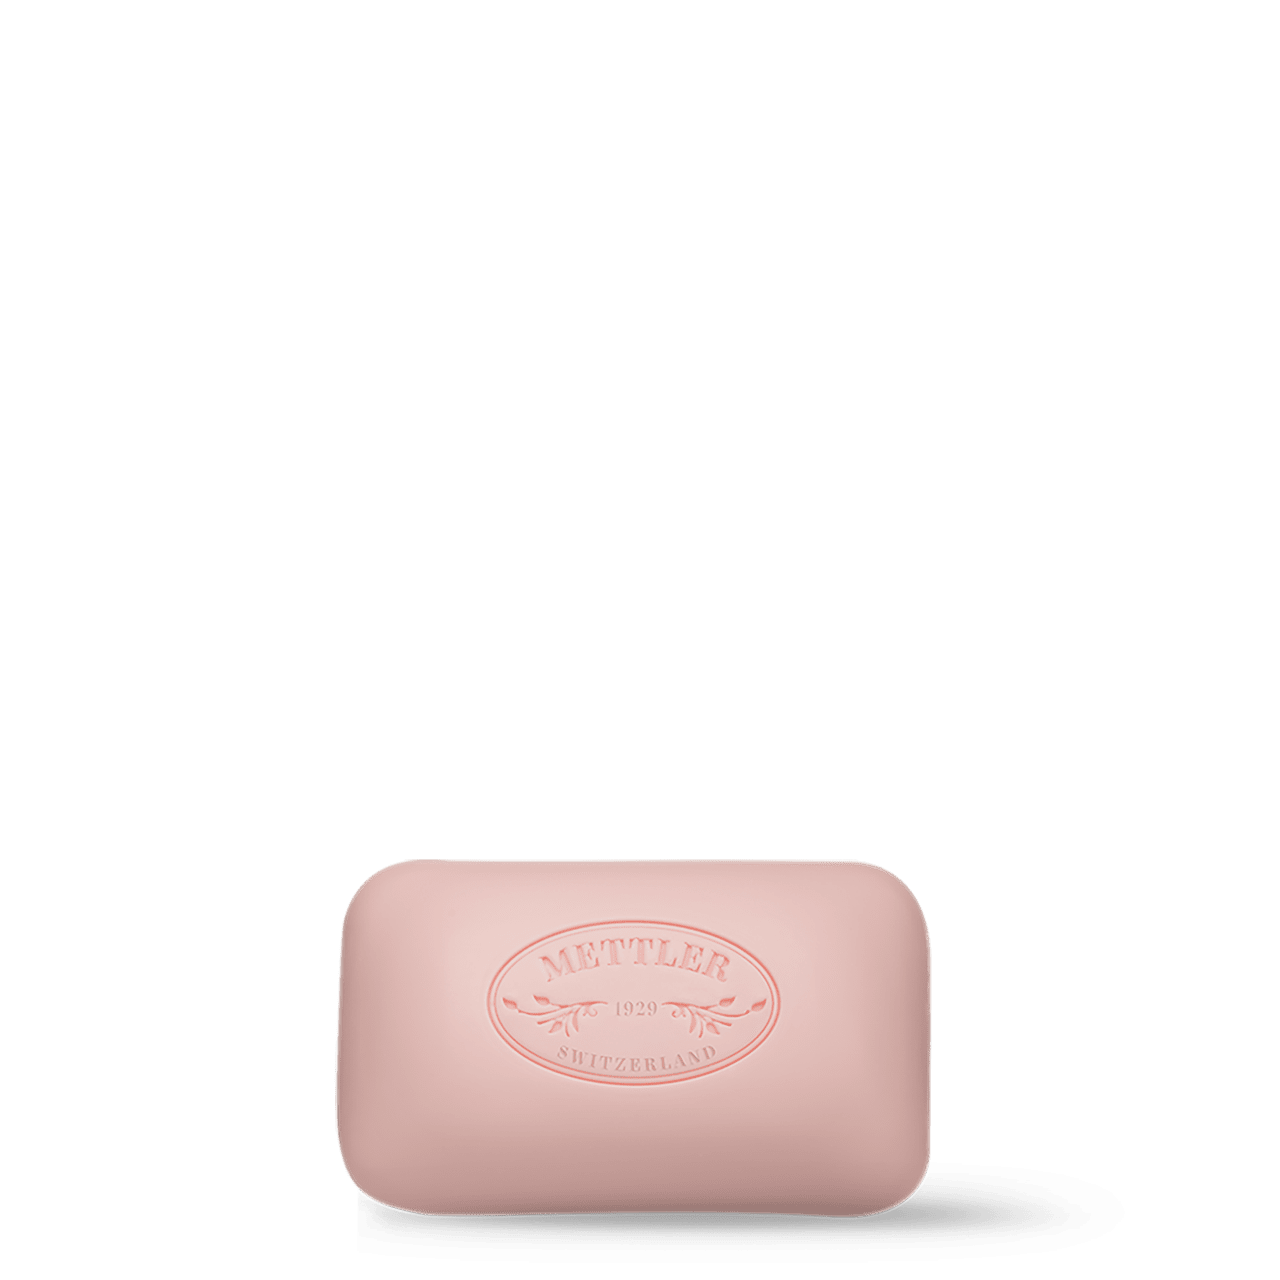 Sensitive Skin Silky Soap for Hands and Face – Mettler1929